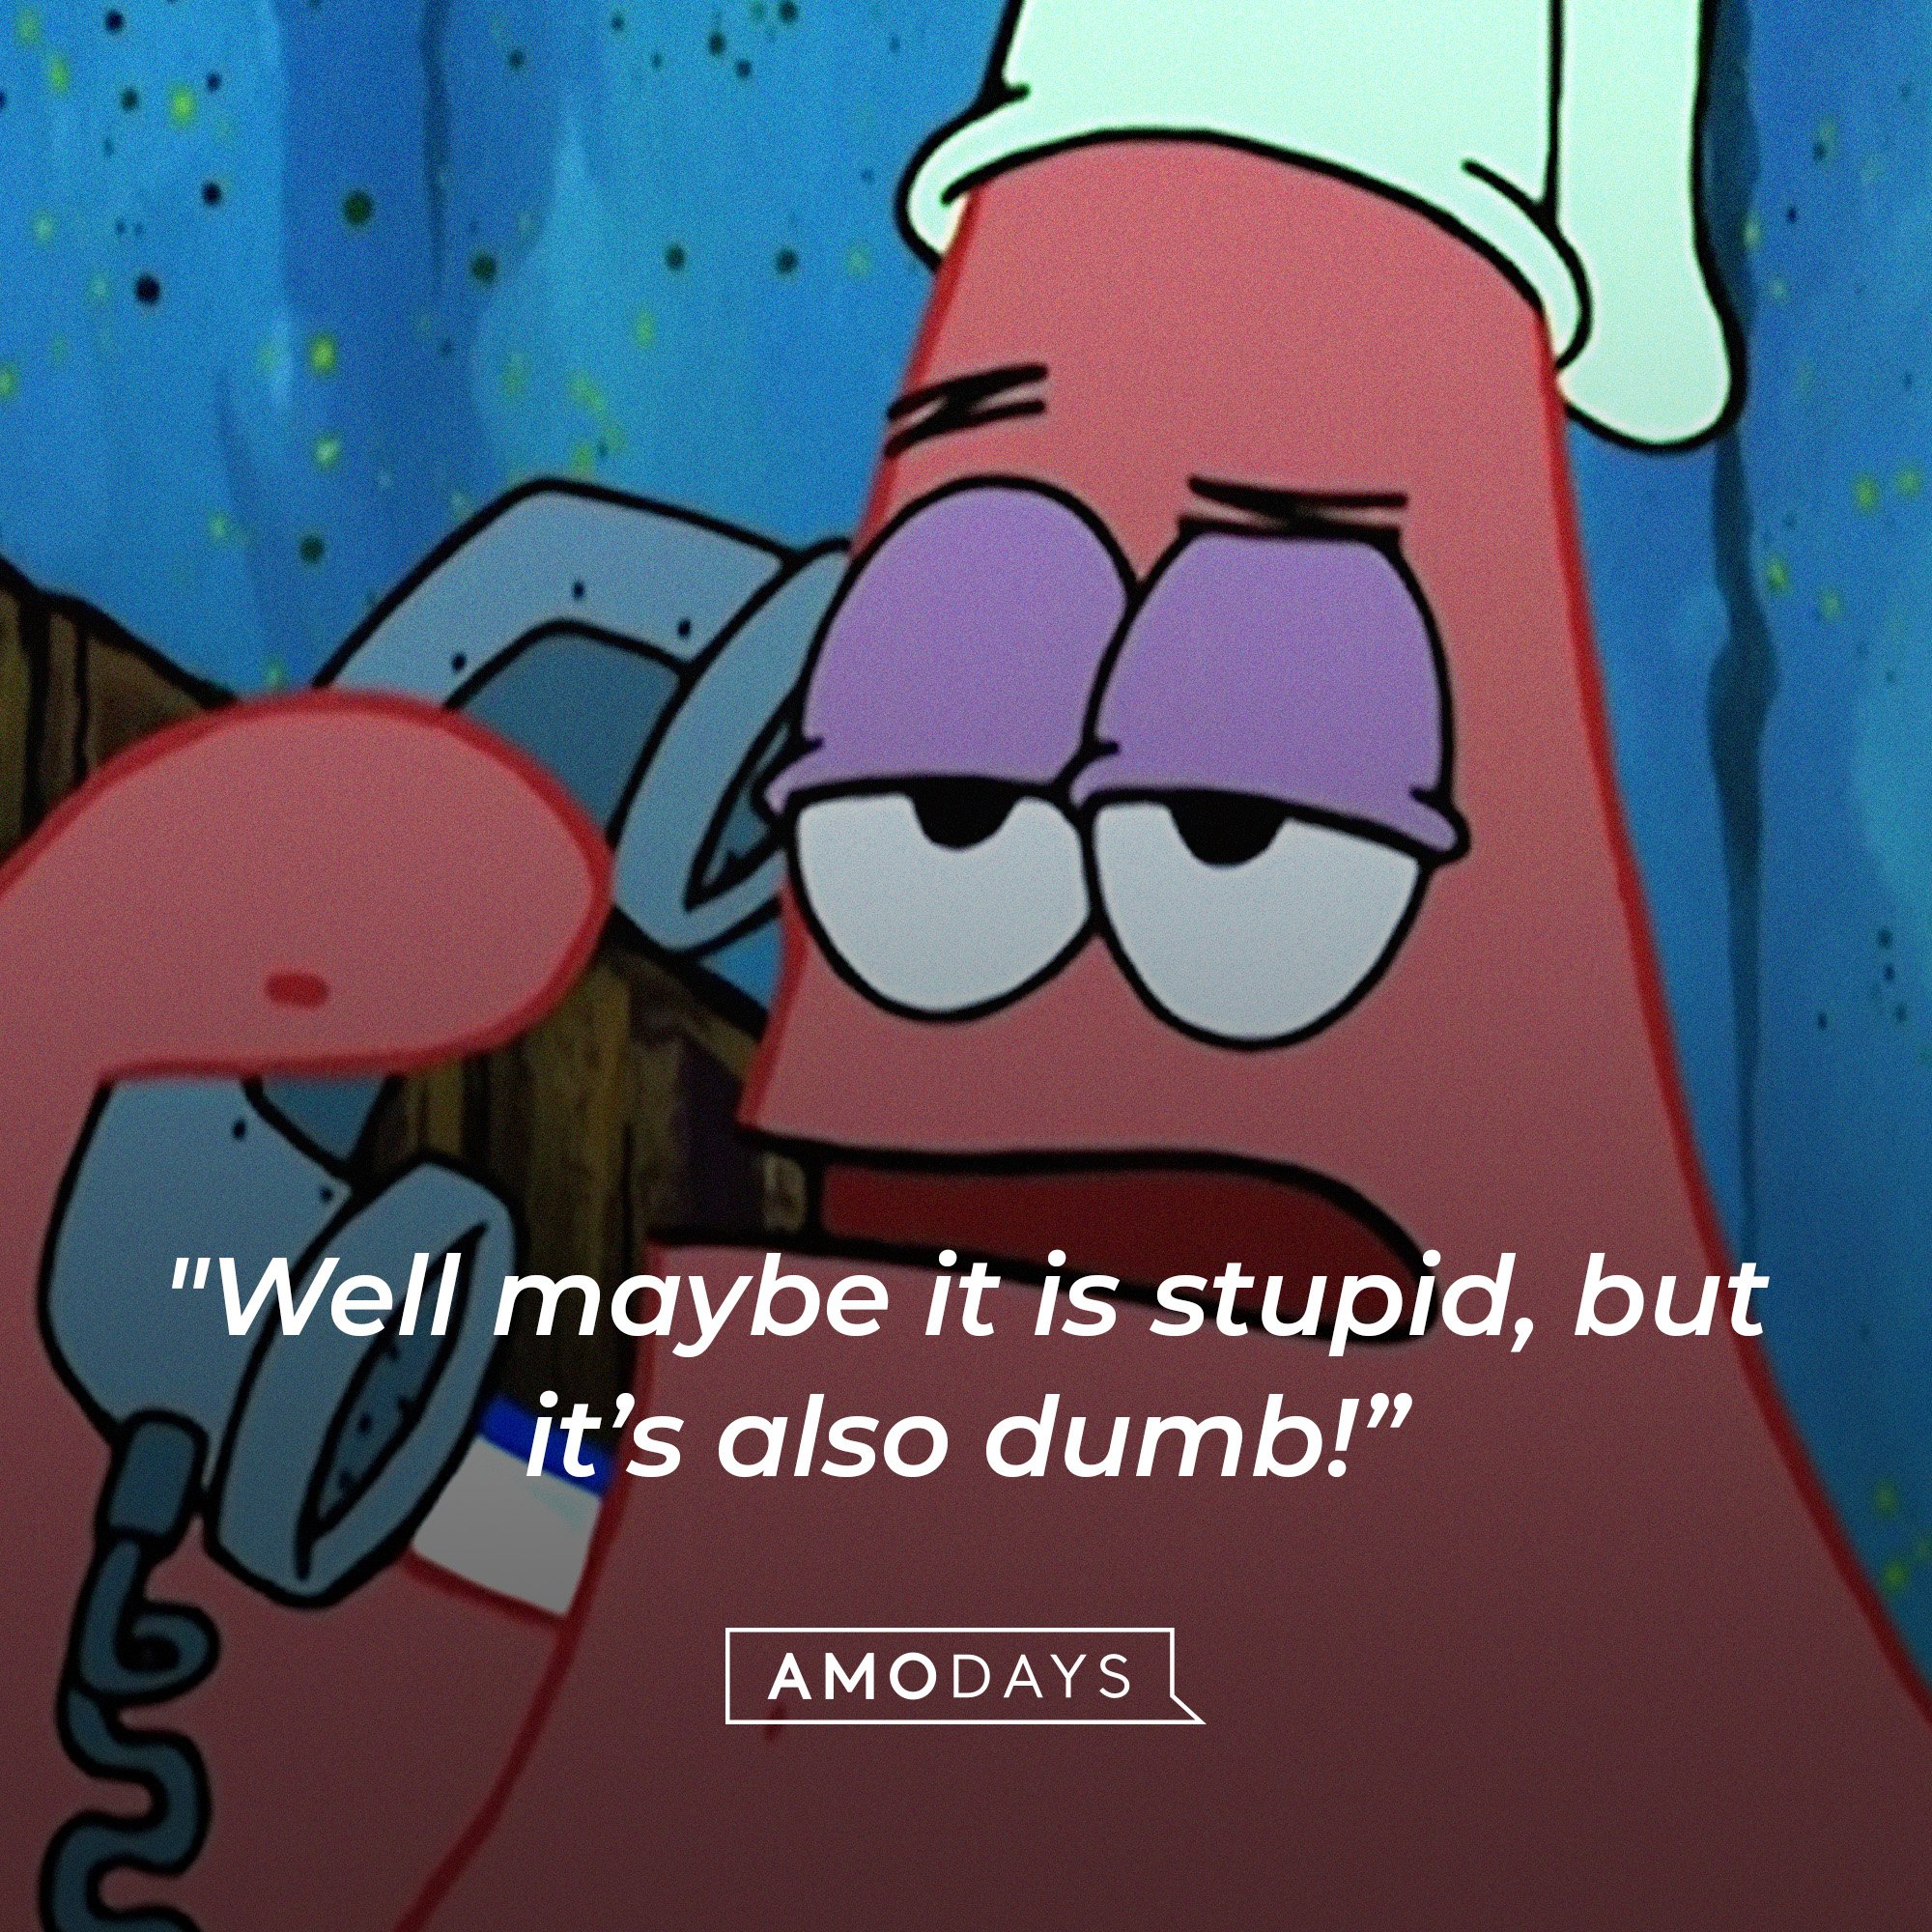 Patrick Star’s quote: "Well maybe it is stupid, but it’s also dumb!” | Image: AmoDays